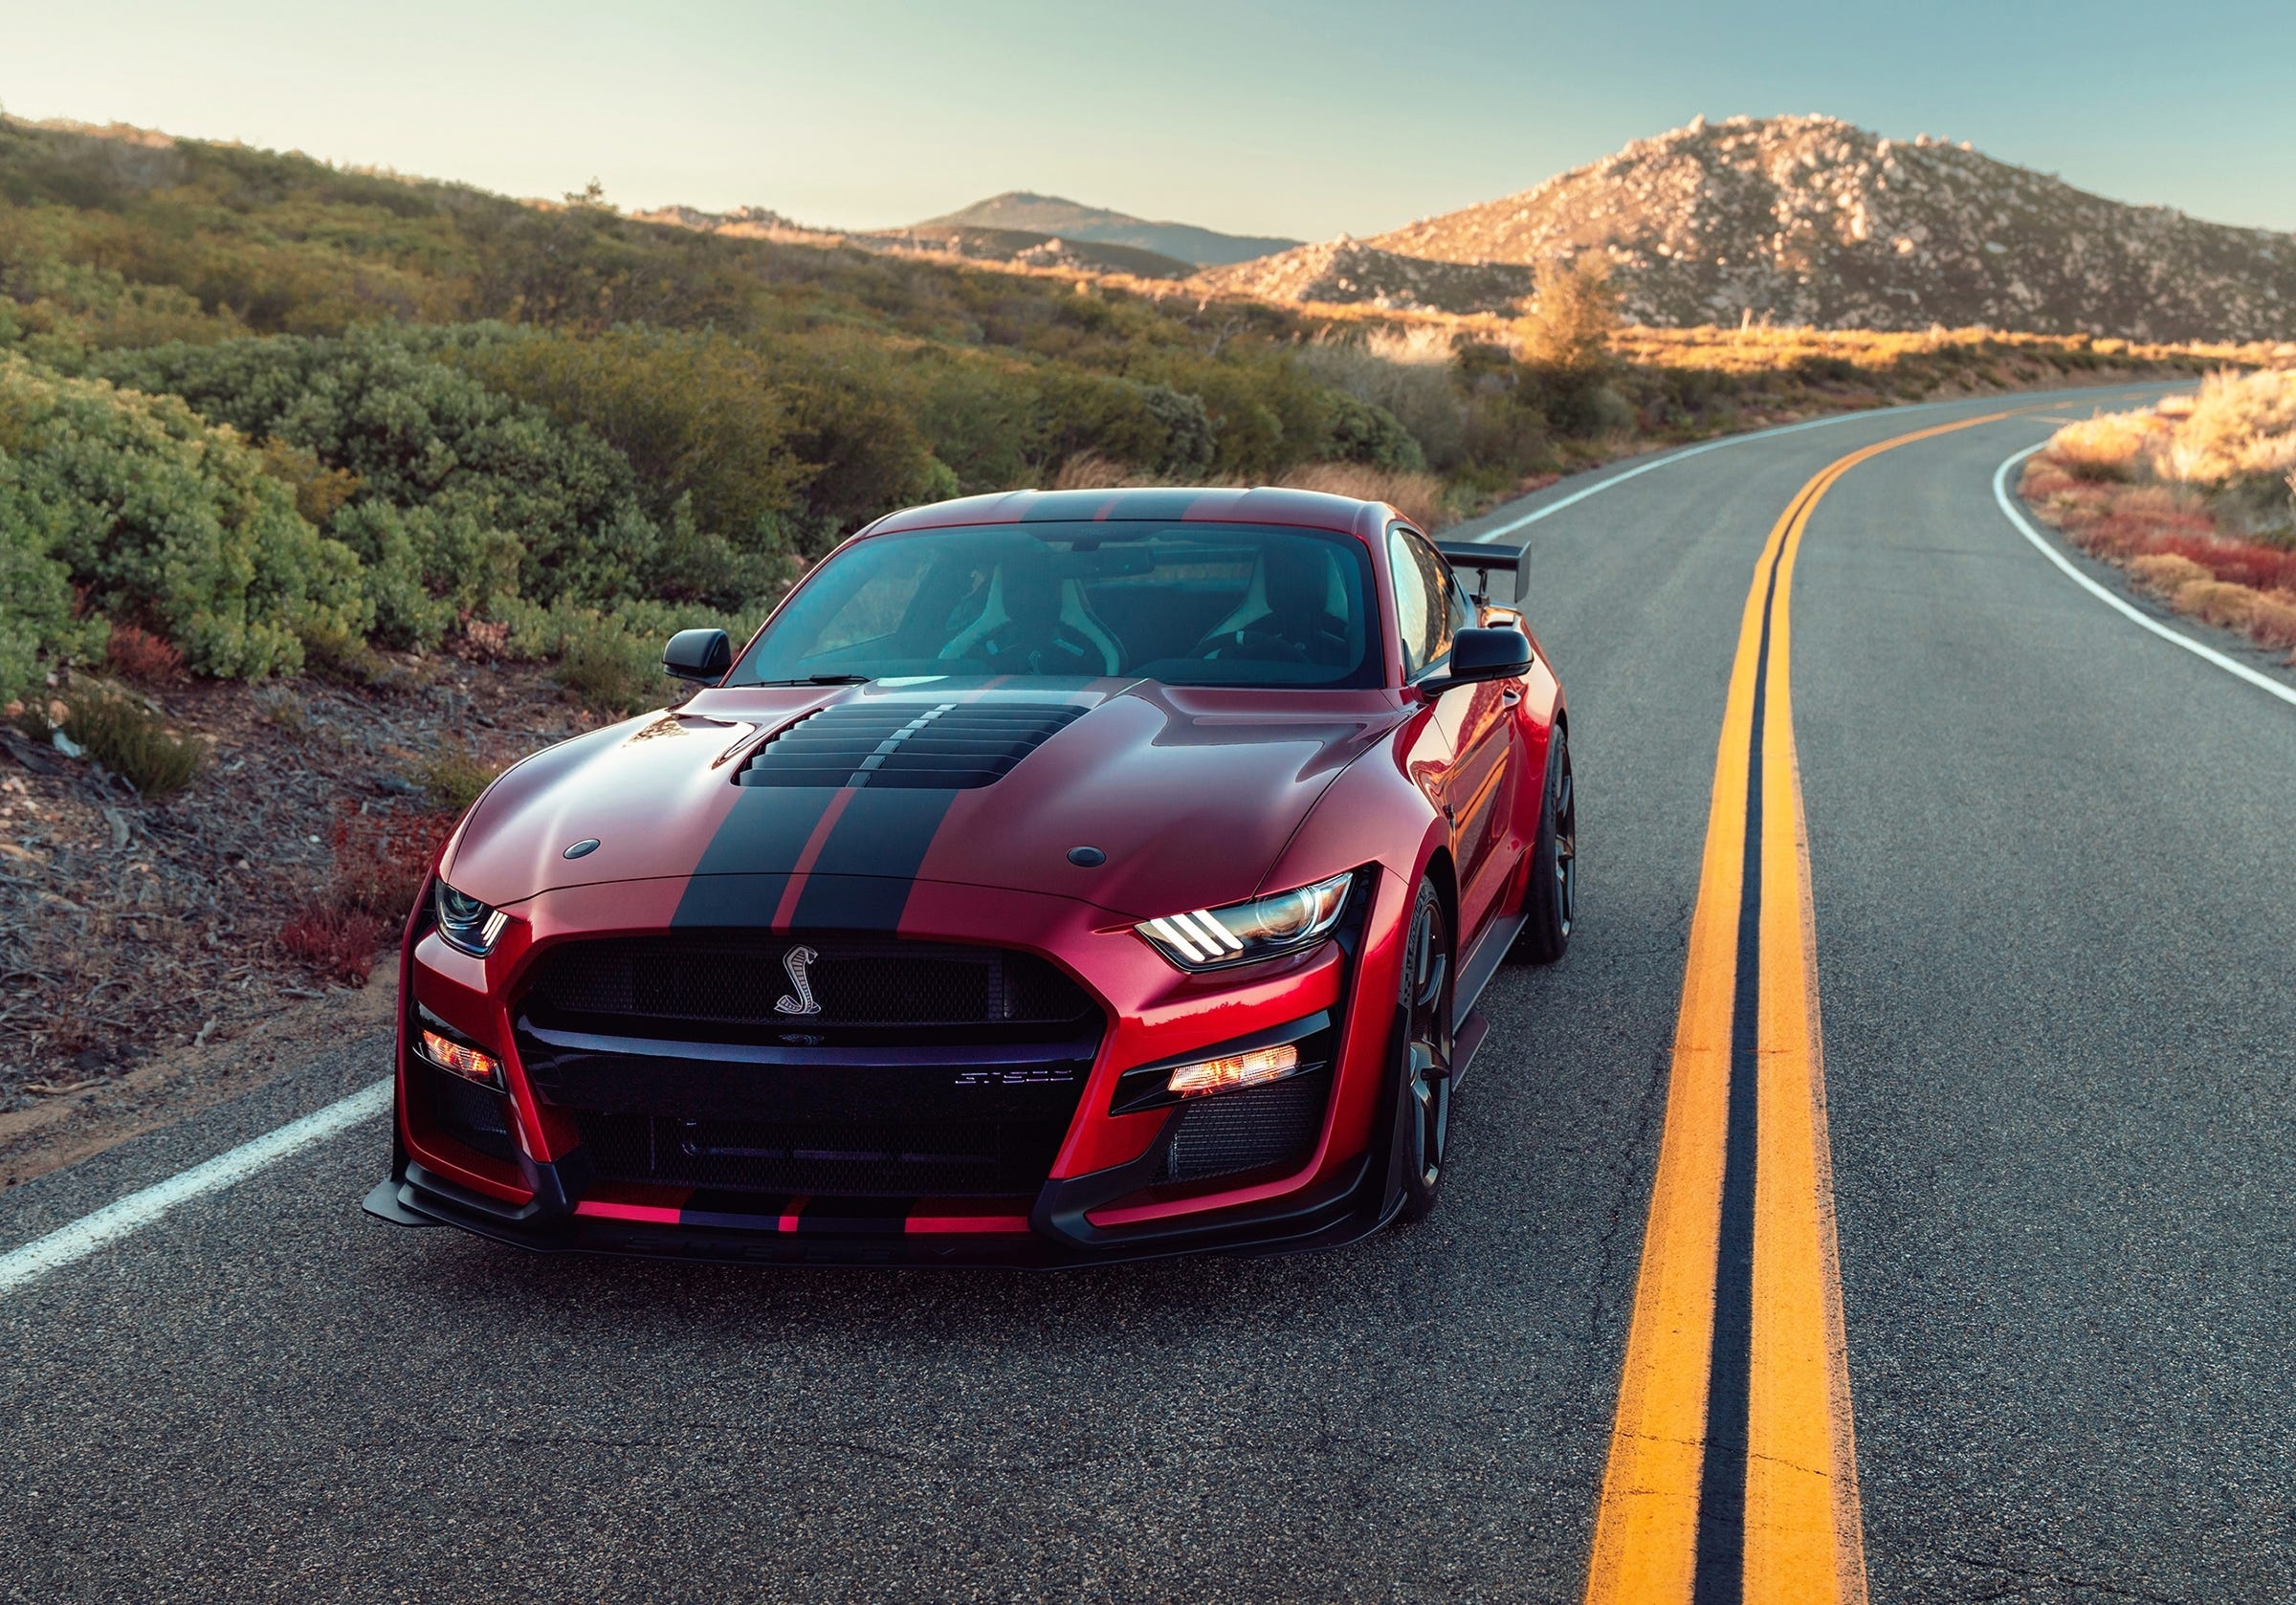 GT500, Mustang test drive, Most powerful Mustang, Automobile review, 2400x1680 HD Desktop